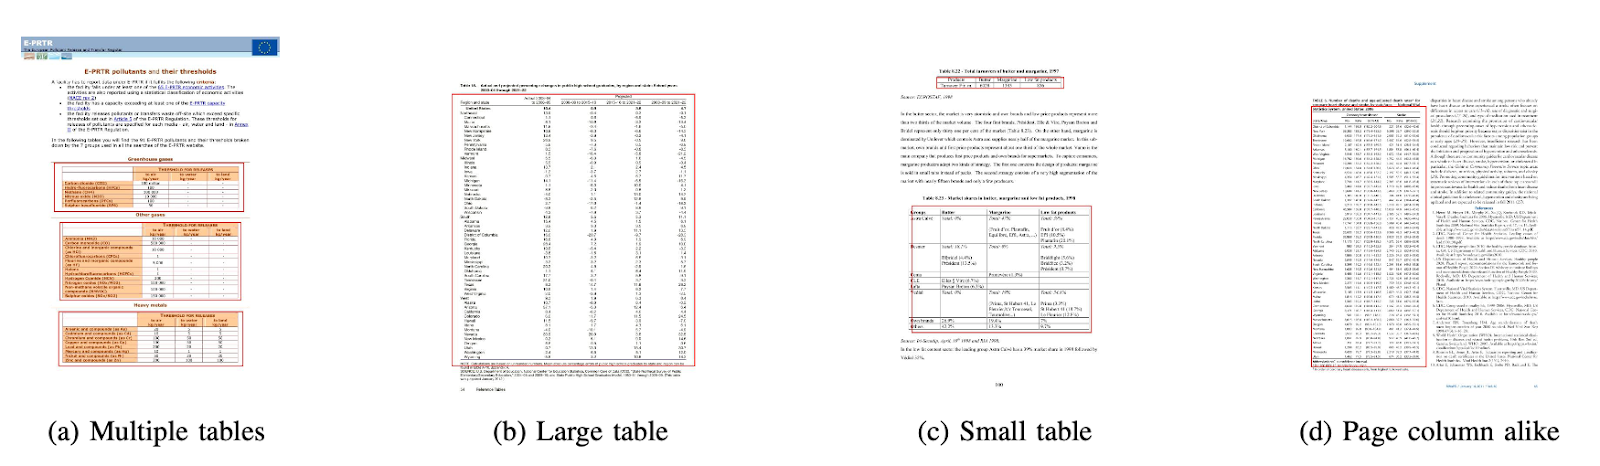 Table Detection, Information Extraction and Structuring using Deep Learning